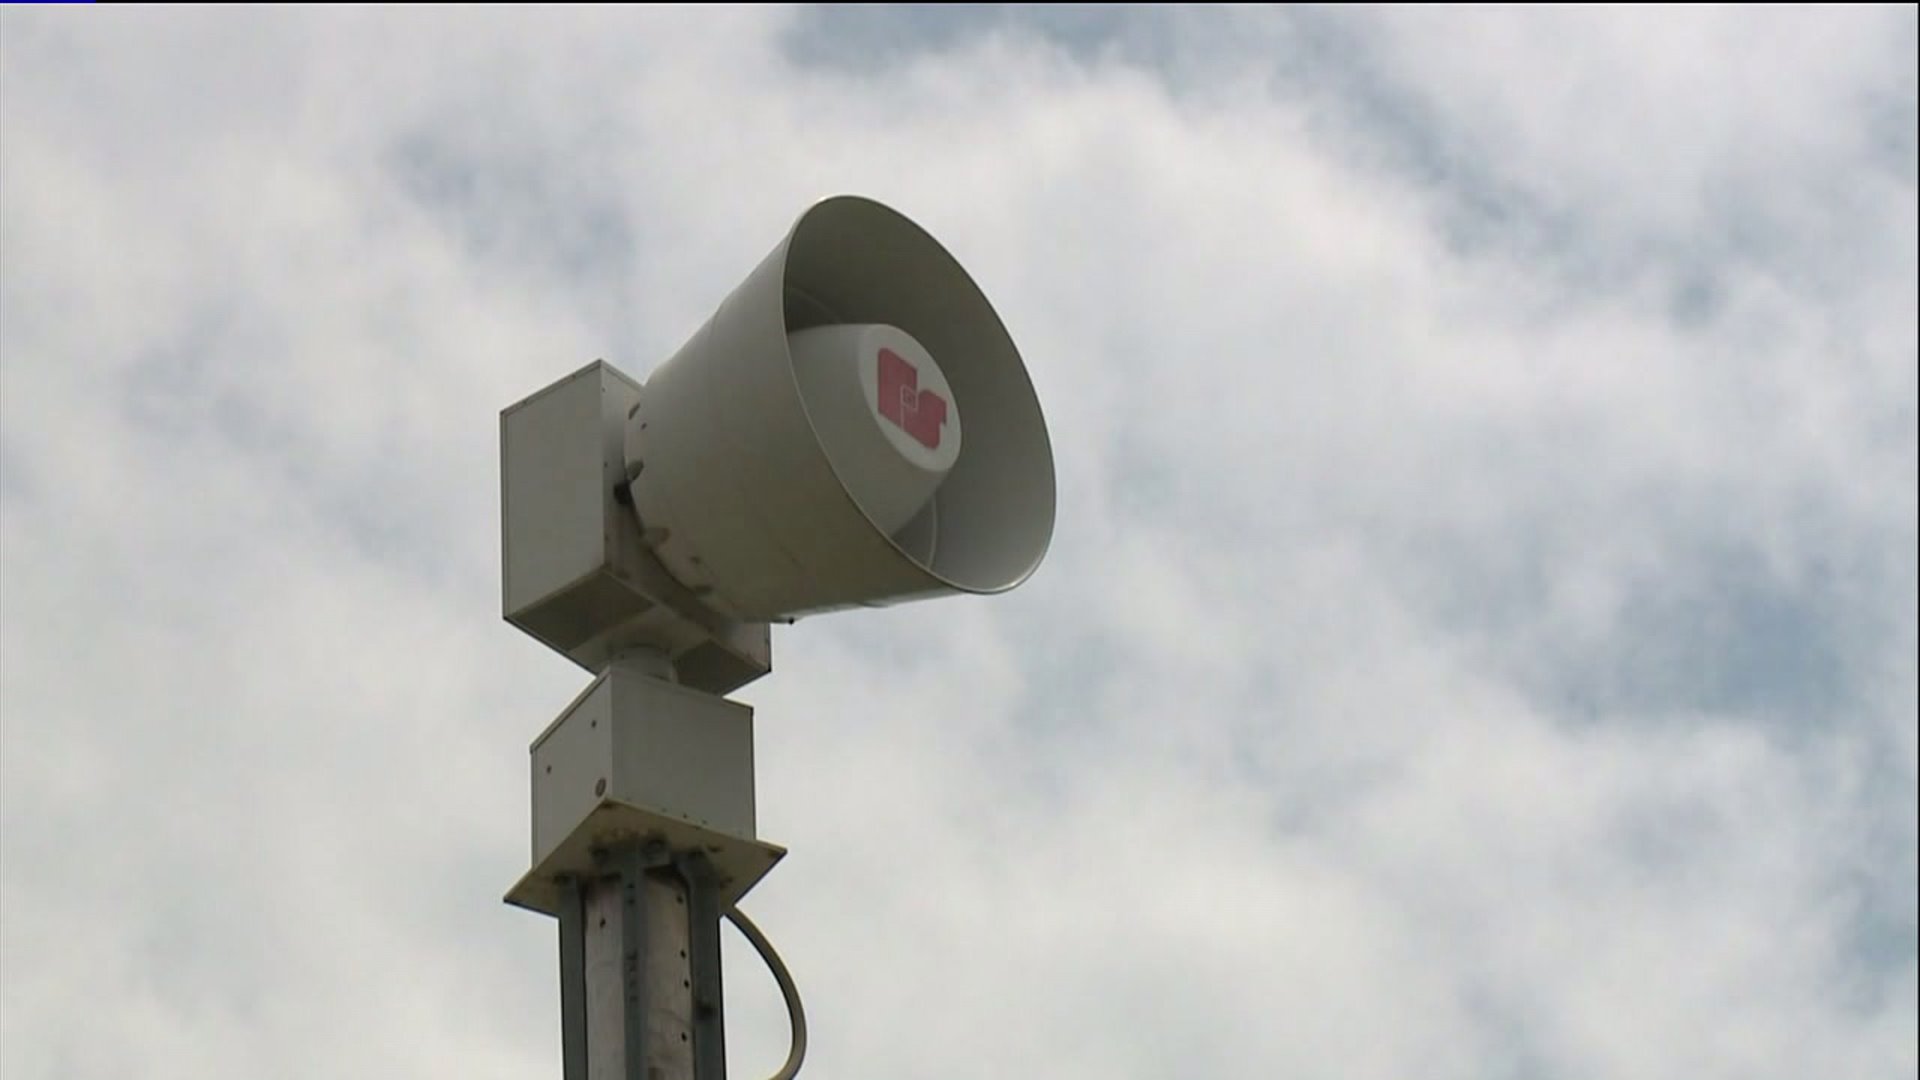 Crawford County to Host Annual Tornado Siren Test Next Wednesday